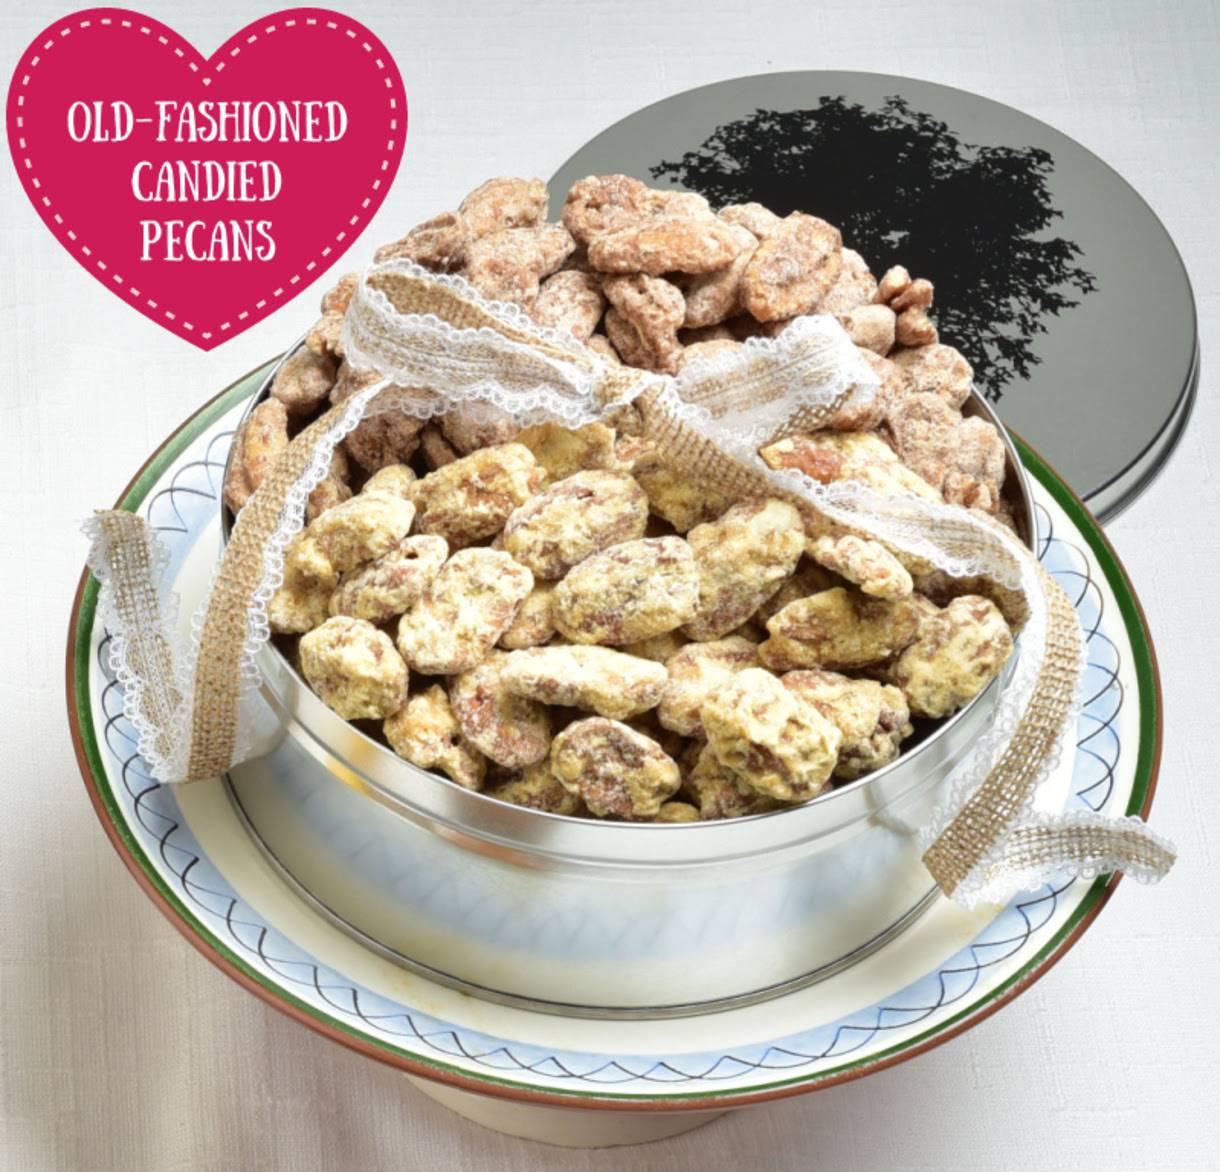 buy-old-fashioned-candy-pecans.jpg